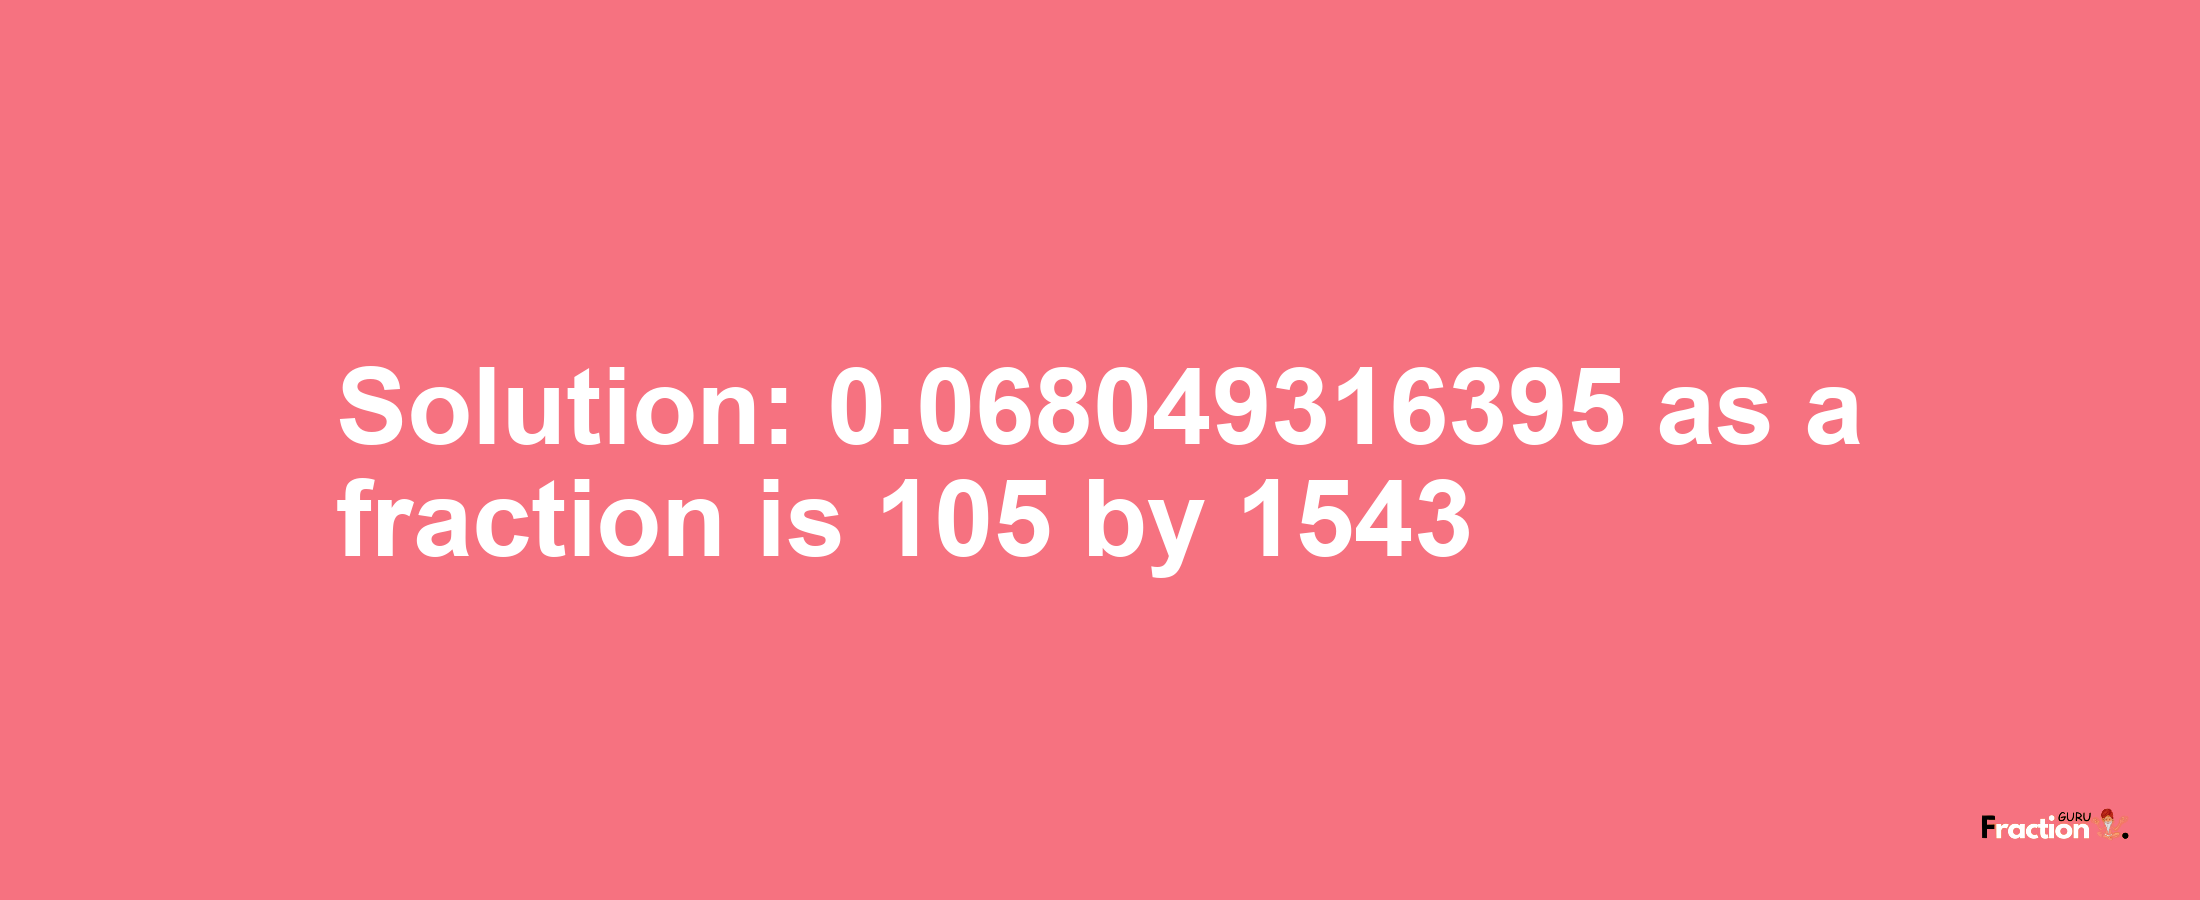 Solution:0.068049316395 as a fraction is 105/1543